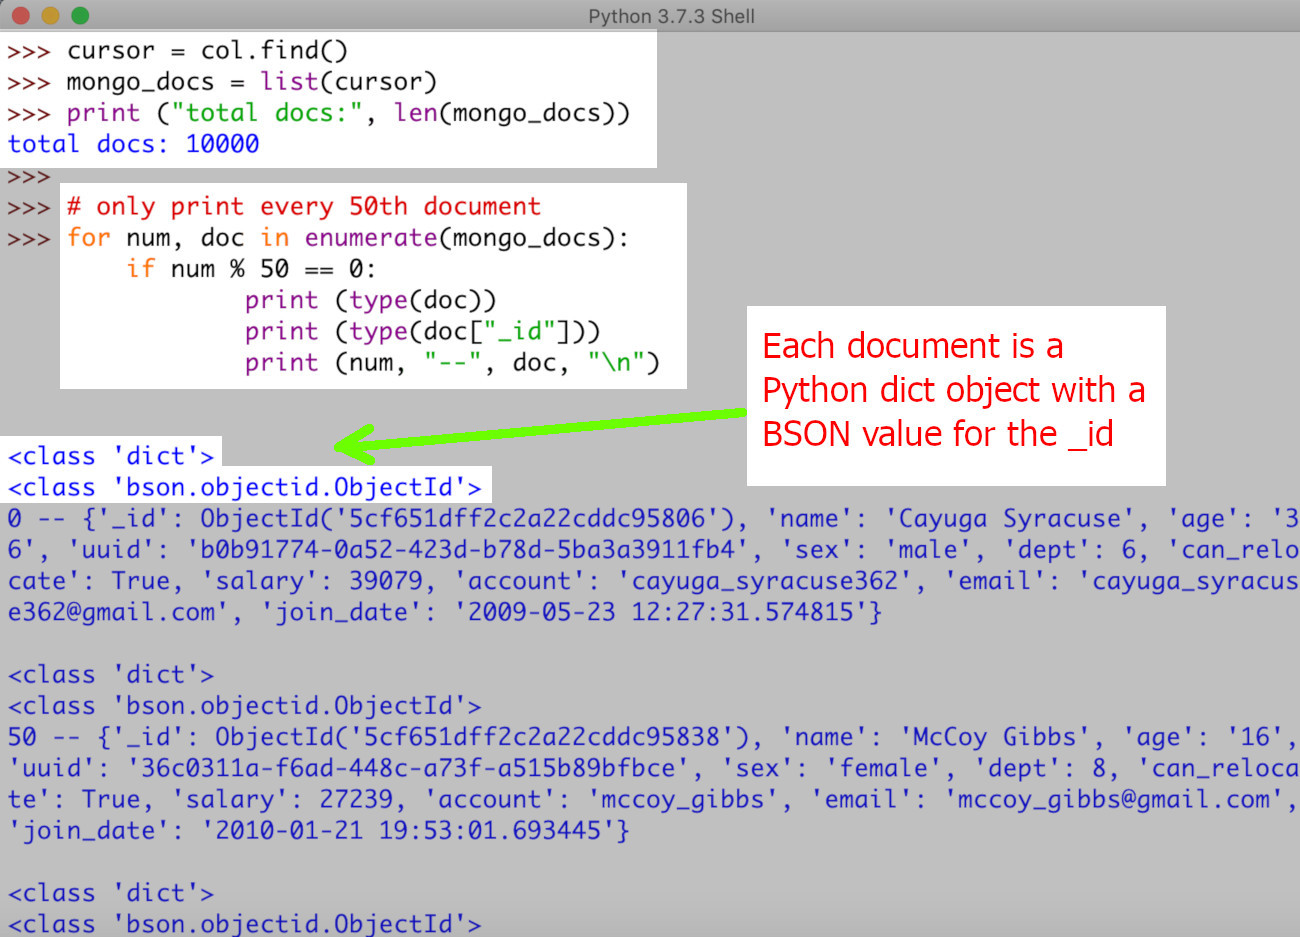 Screenshot of Python IDLE with a find() call to MongoDB to get a collection's documents in a Cursor object